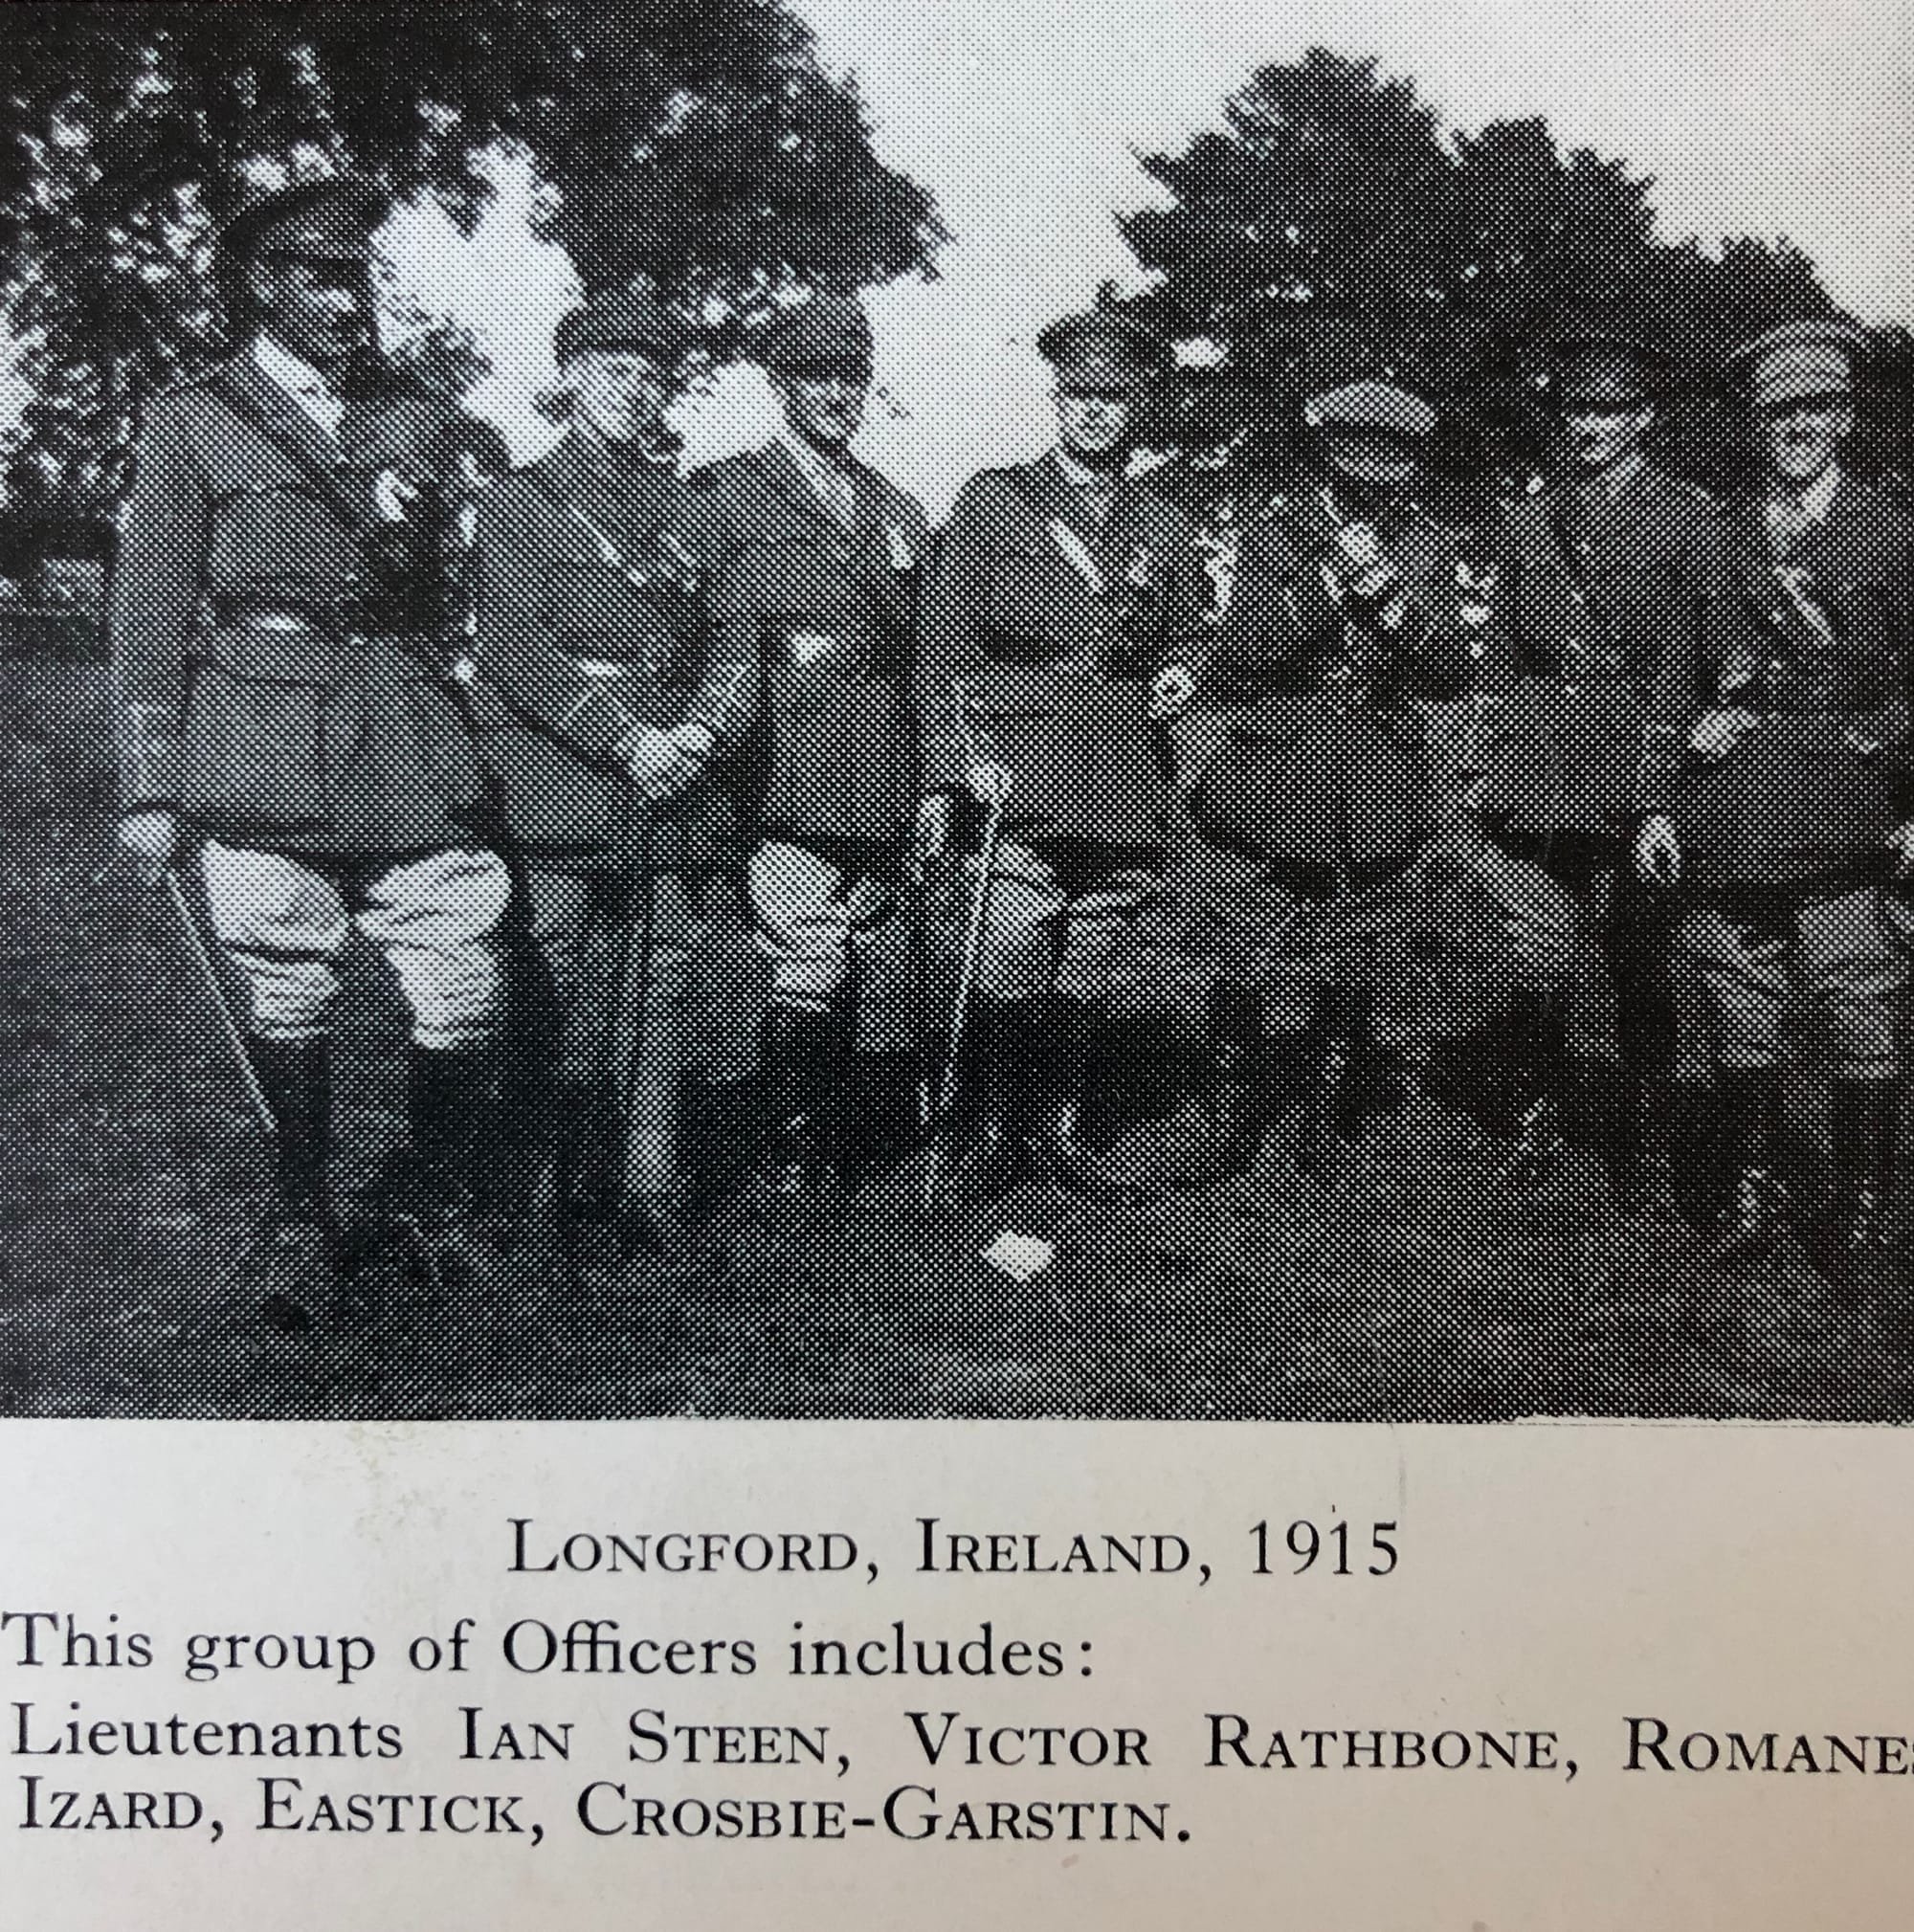 EASTICK, John Clare Newland. 51. Serjeant. Shown here as Lieutenant at Longford 1915 from Old Comrades Association Bulletin.